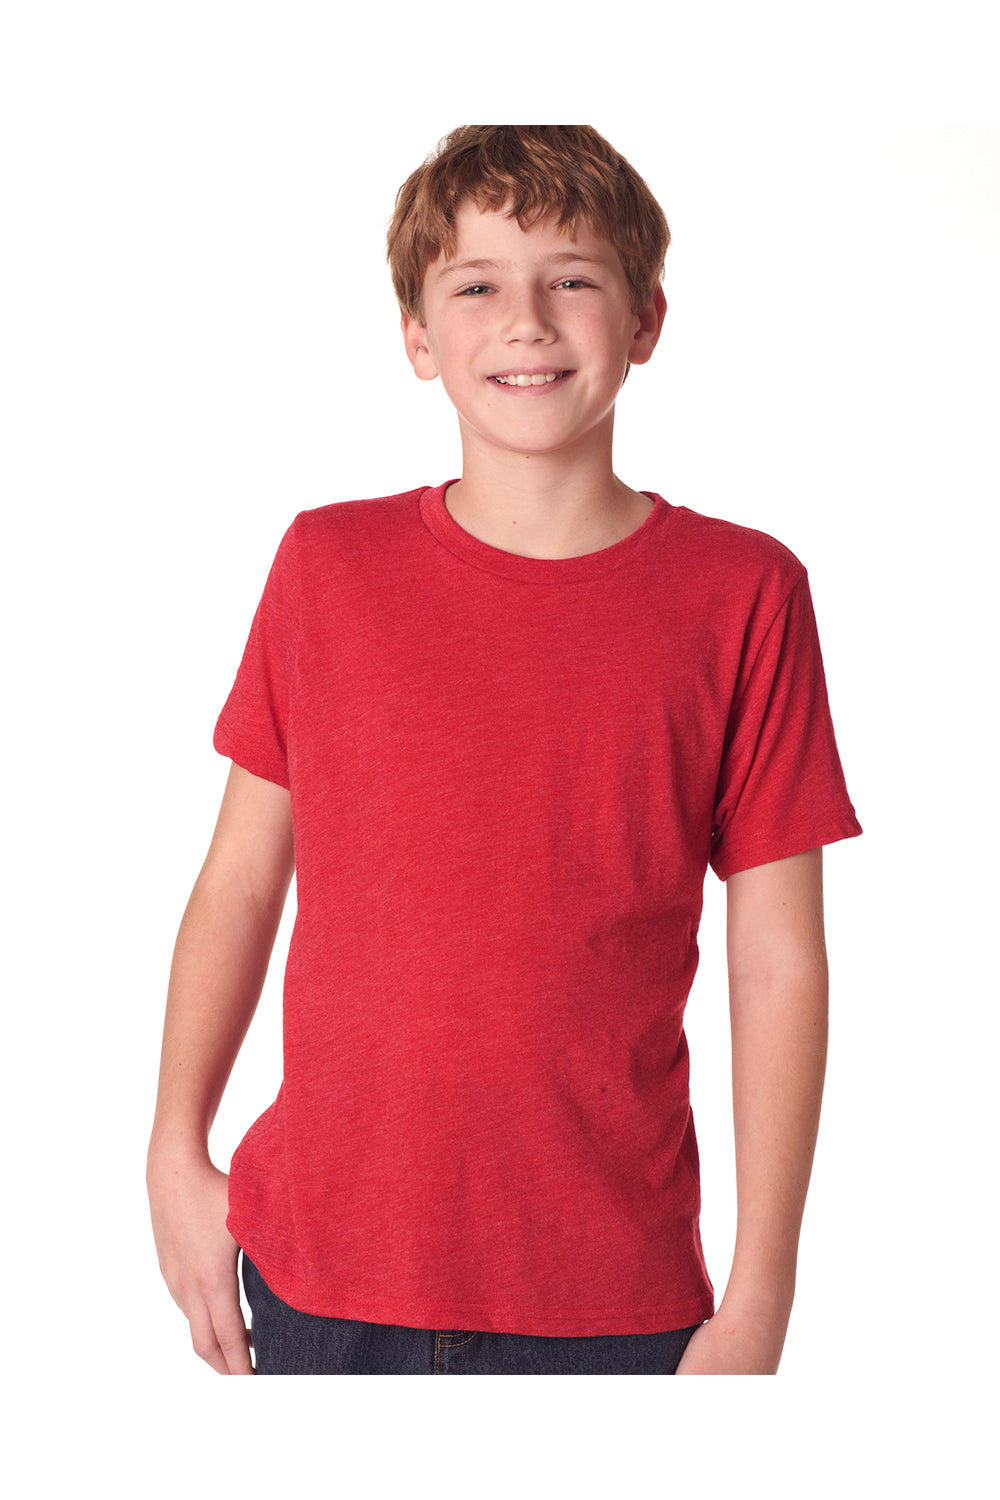 Next Level N6310 Youth Jersey Short Sleeve Crewneck T-Shirt Red Front